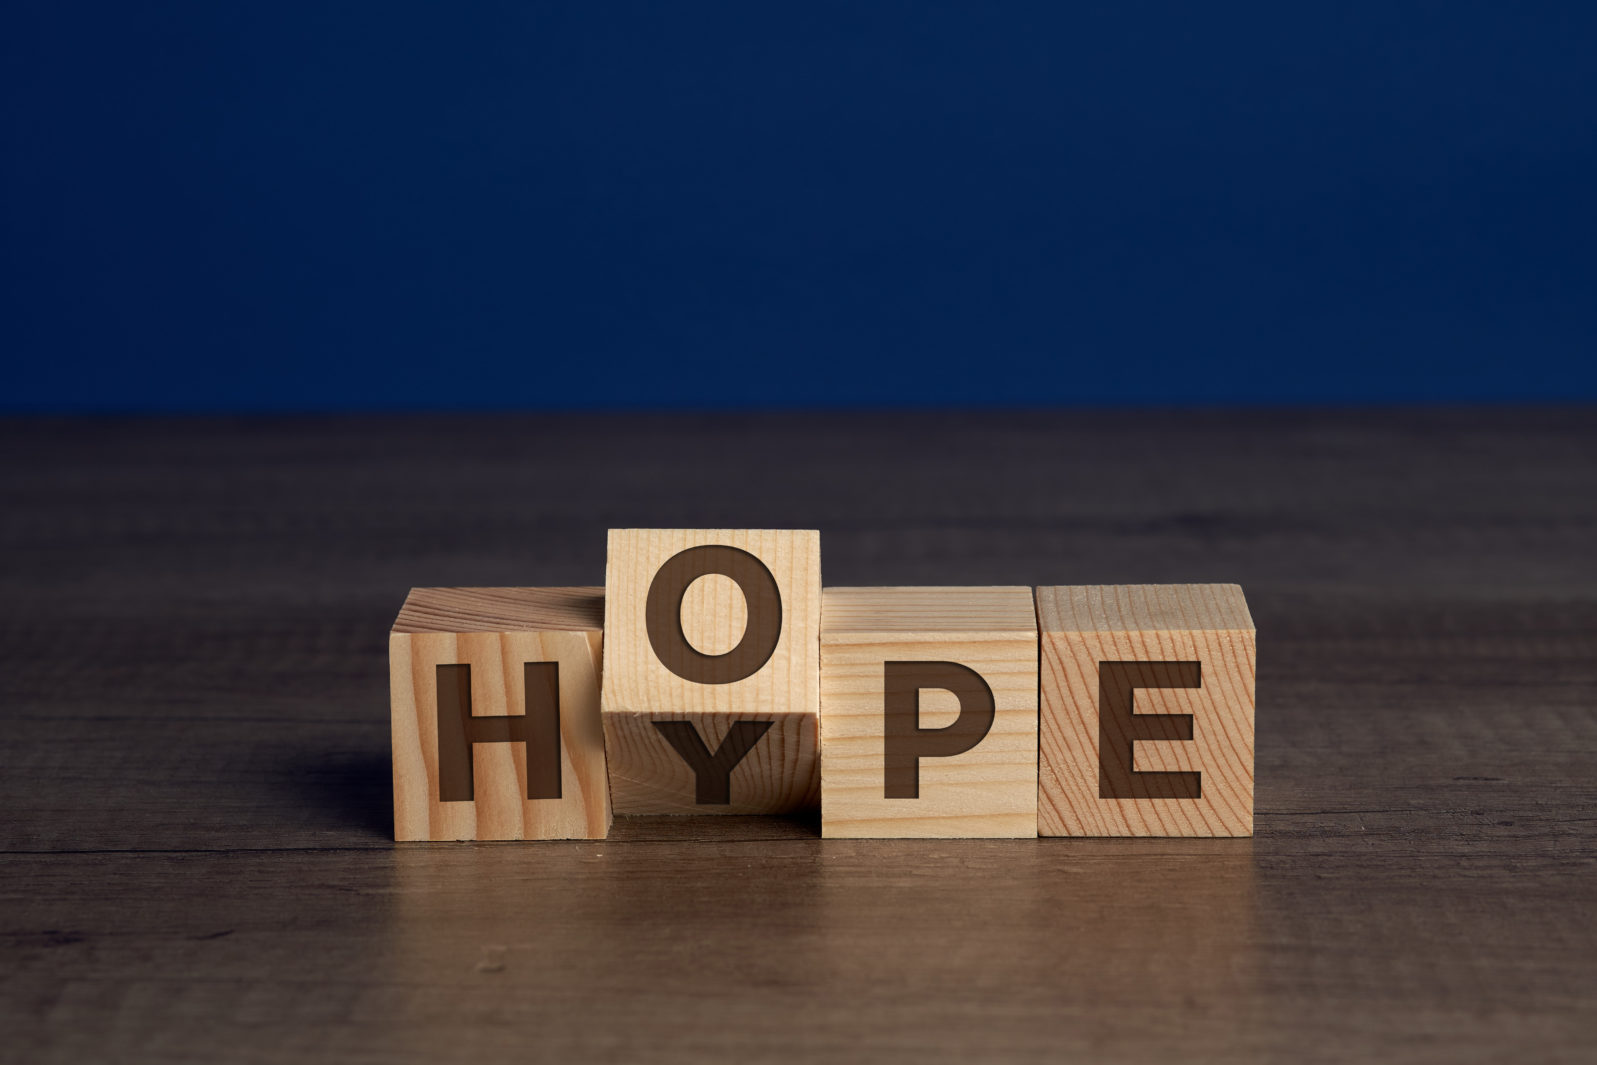 Words HYPE and HOPE written on blocks of wood. The word HOPE goes over the word HYPE.